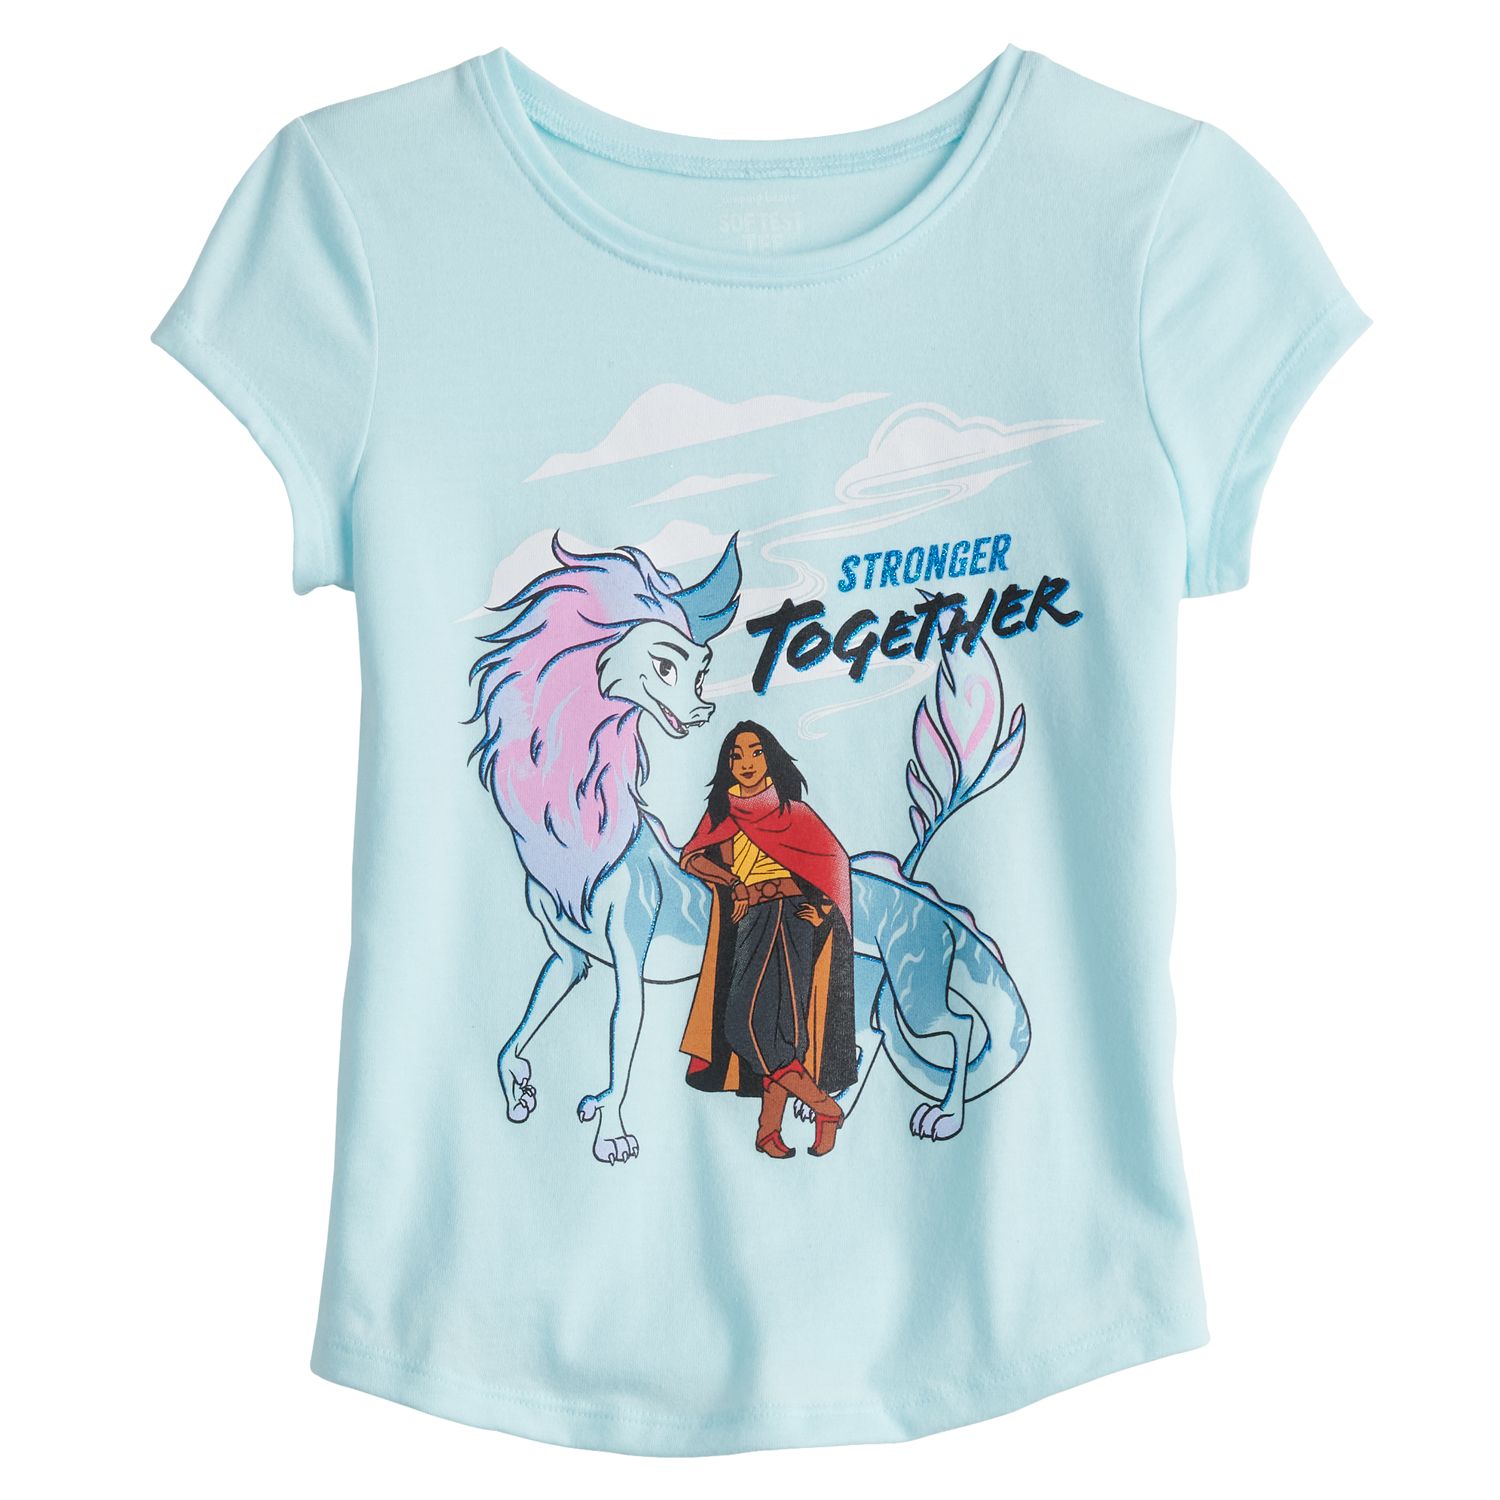 Image for Disney/Jumping Beans Disney's Raya & The Last Dragon Girls 4-12 Graphic Tee by Jumping Beans® at Kohl's.